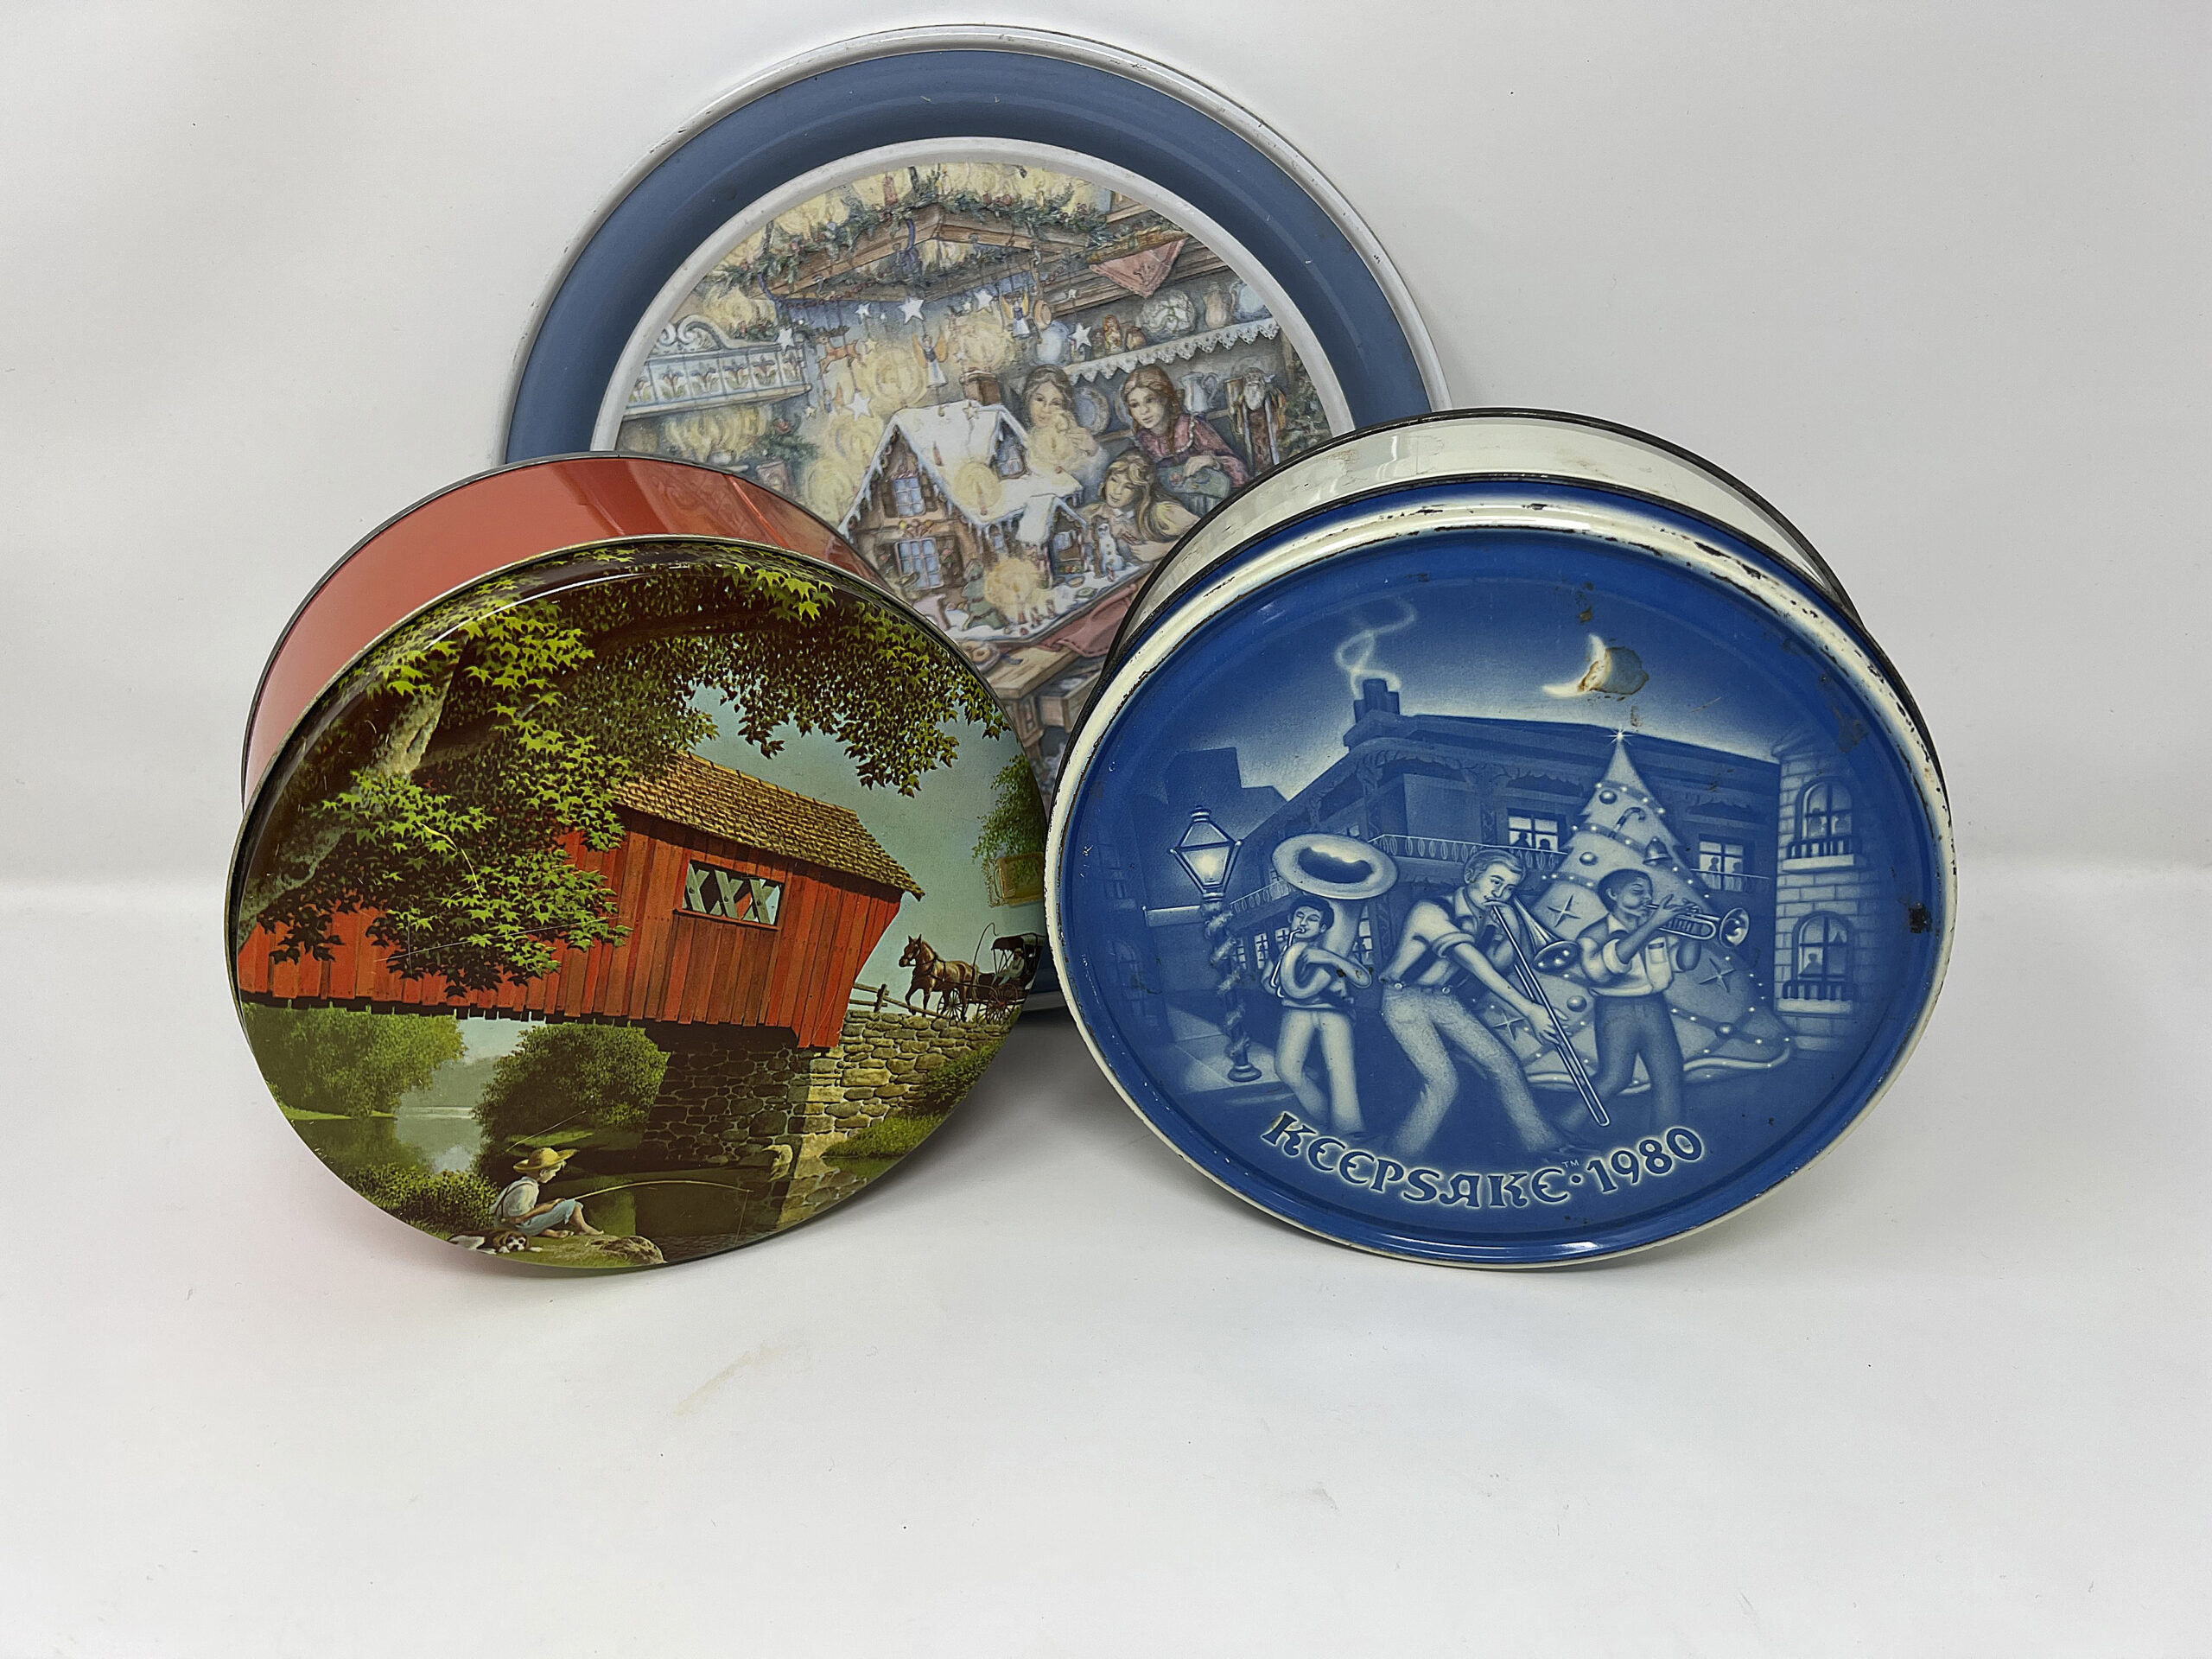 A few of Miney’s cookie tins for homemade Danish butter almond cookies.